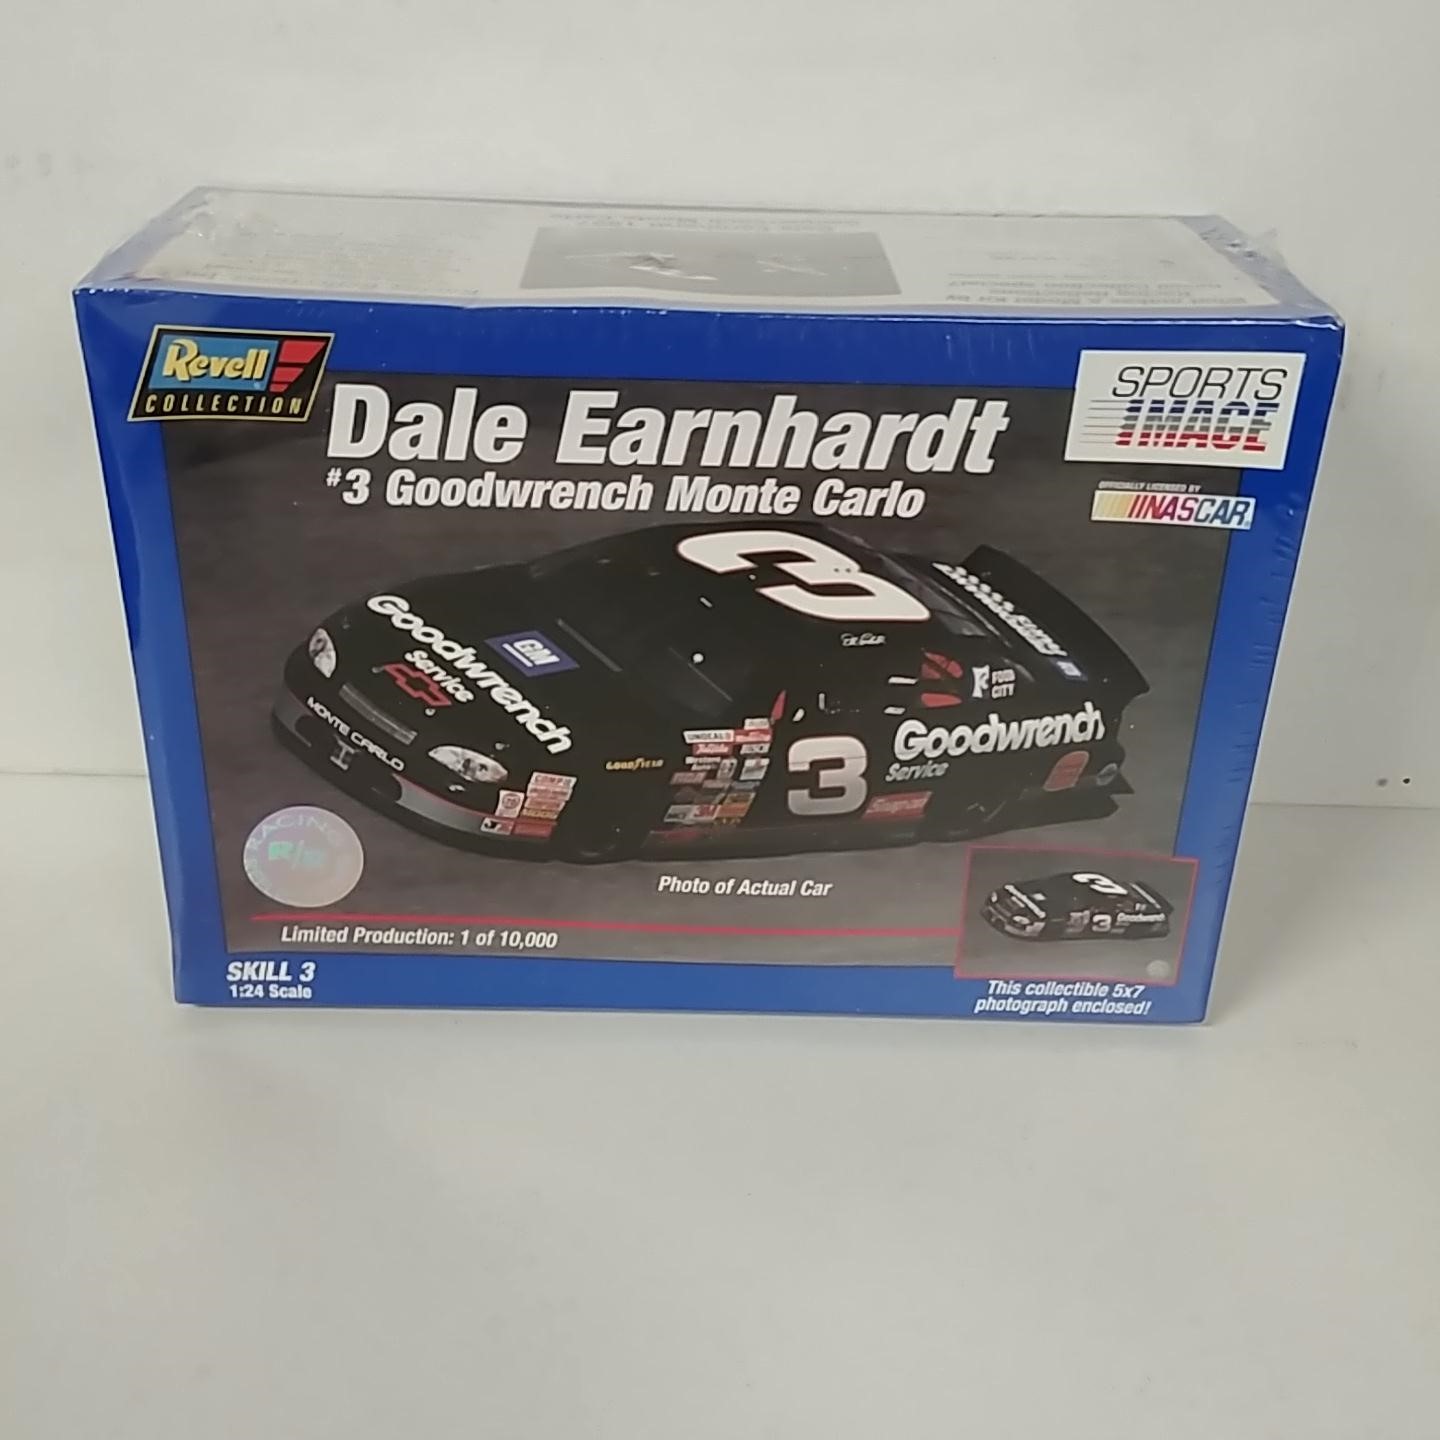 1997 Dale Earnhardt 1/24th GM Goodwrench Monte Carlo model kit by Revell